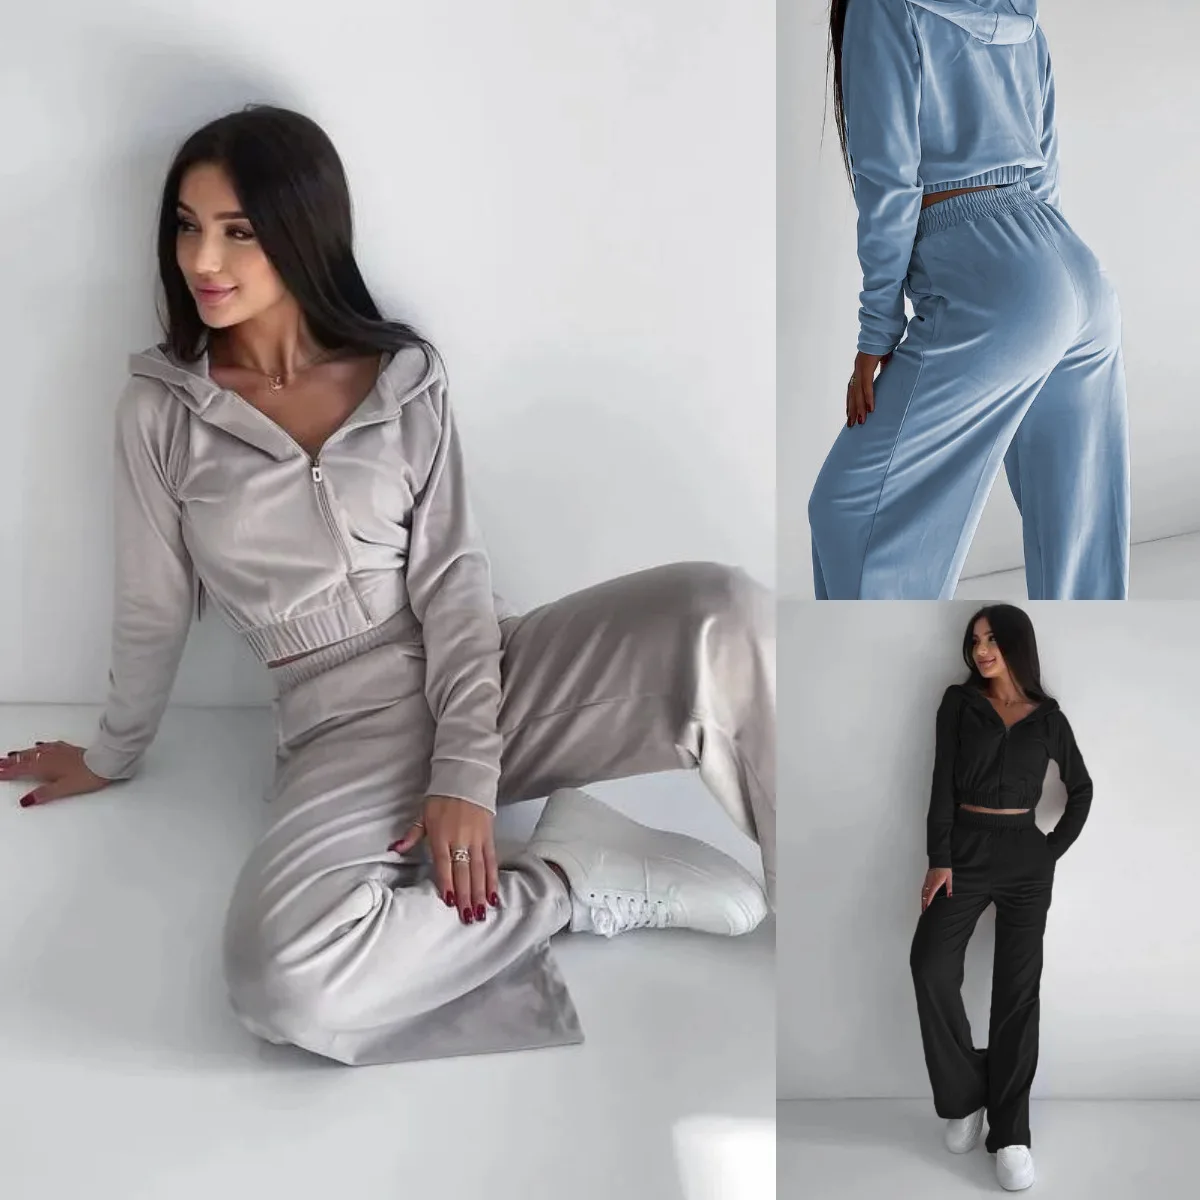 Women'S Tracksuit Outfits Fall Winter Casual Long Sleeve Hoodie Set Fitness Set Yoga Wear Training Jogger Set 2 Piece Pants Set summer tracksuit solid color v neck men short sleeve t shirt drawstring pockets shorts for fitness